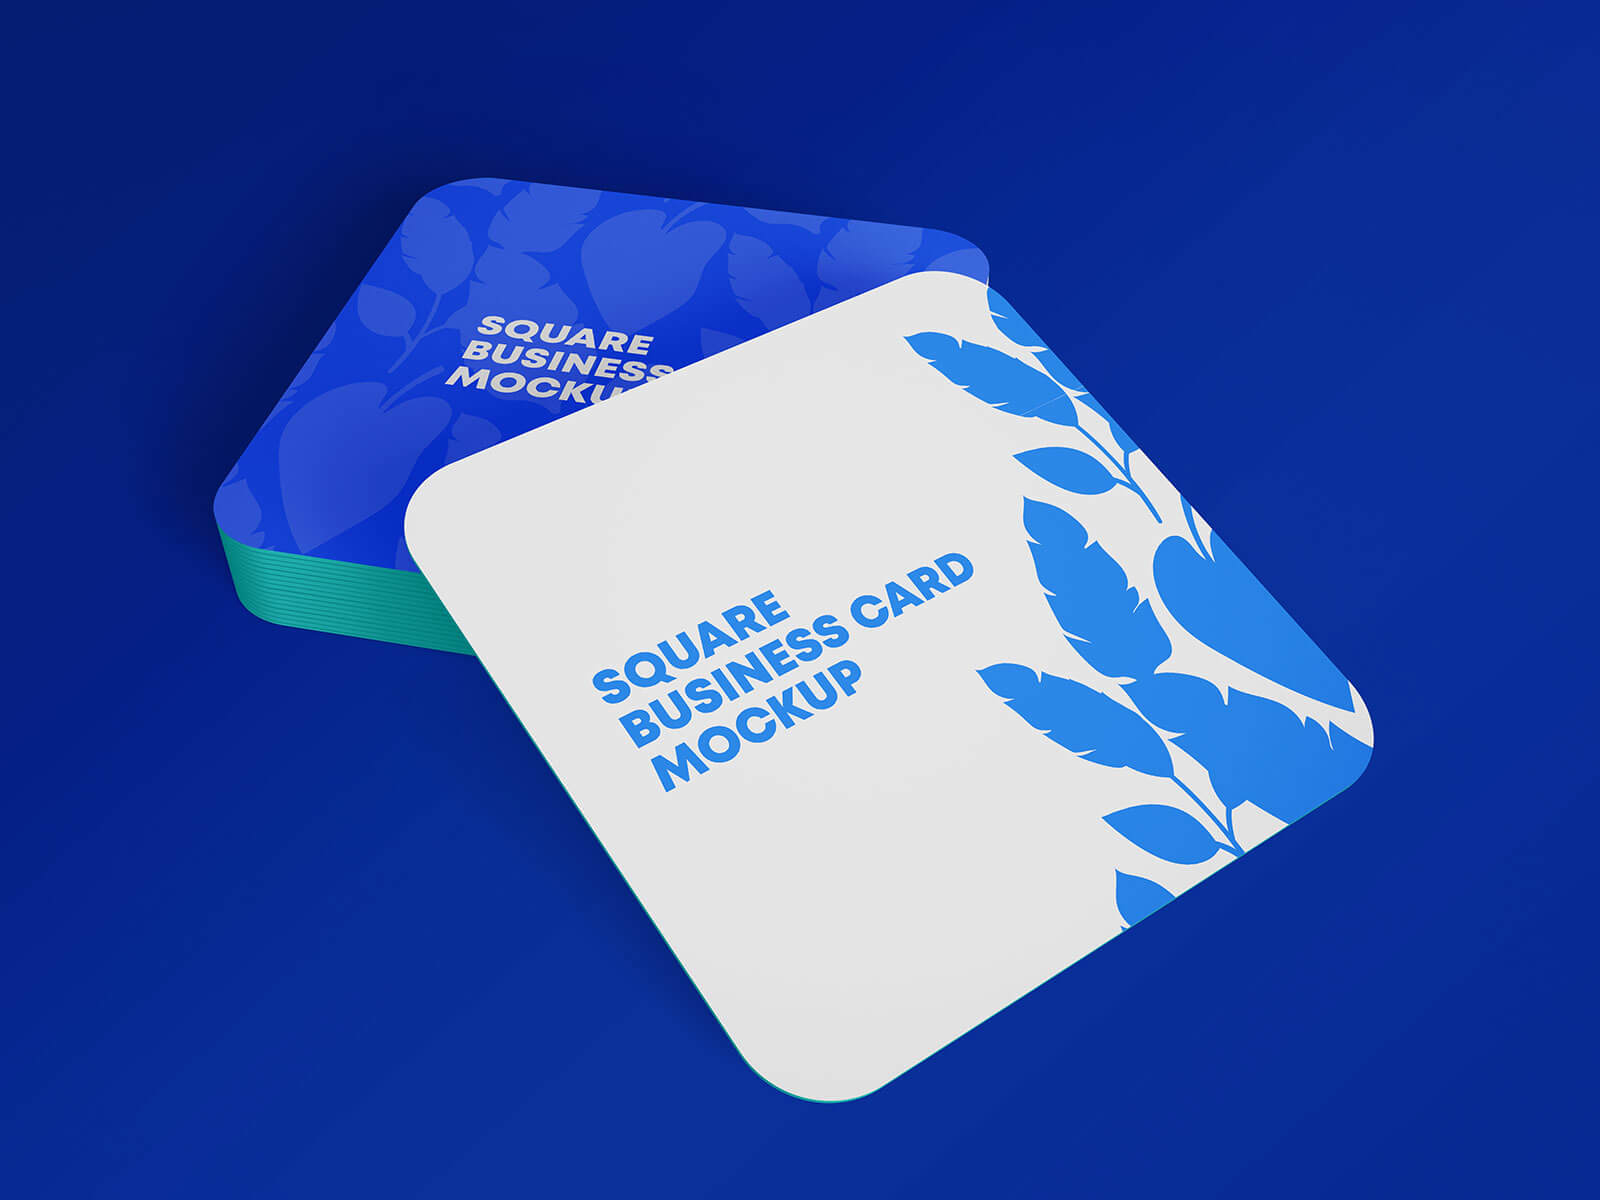 Free Rounded Corners Square Business Card Mockup PSD Set (1)